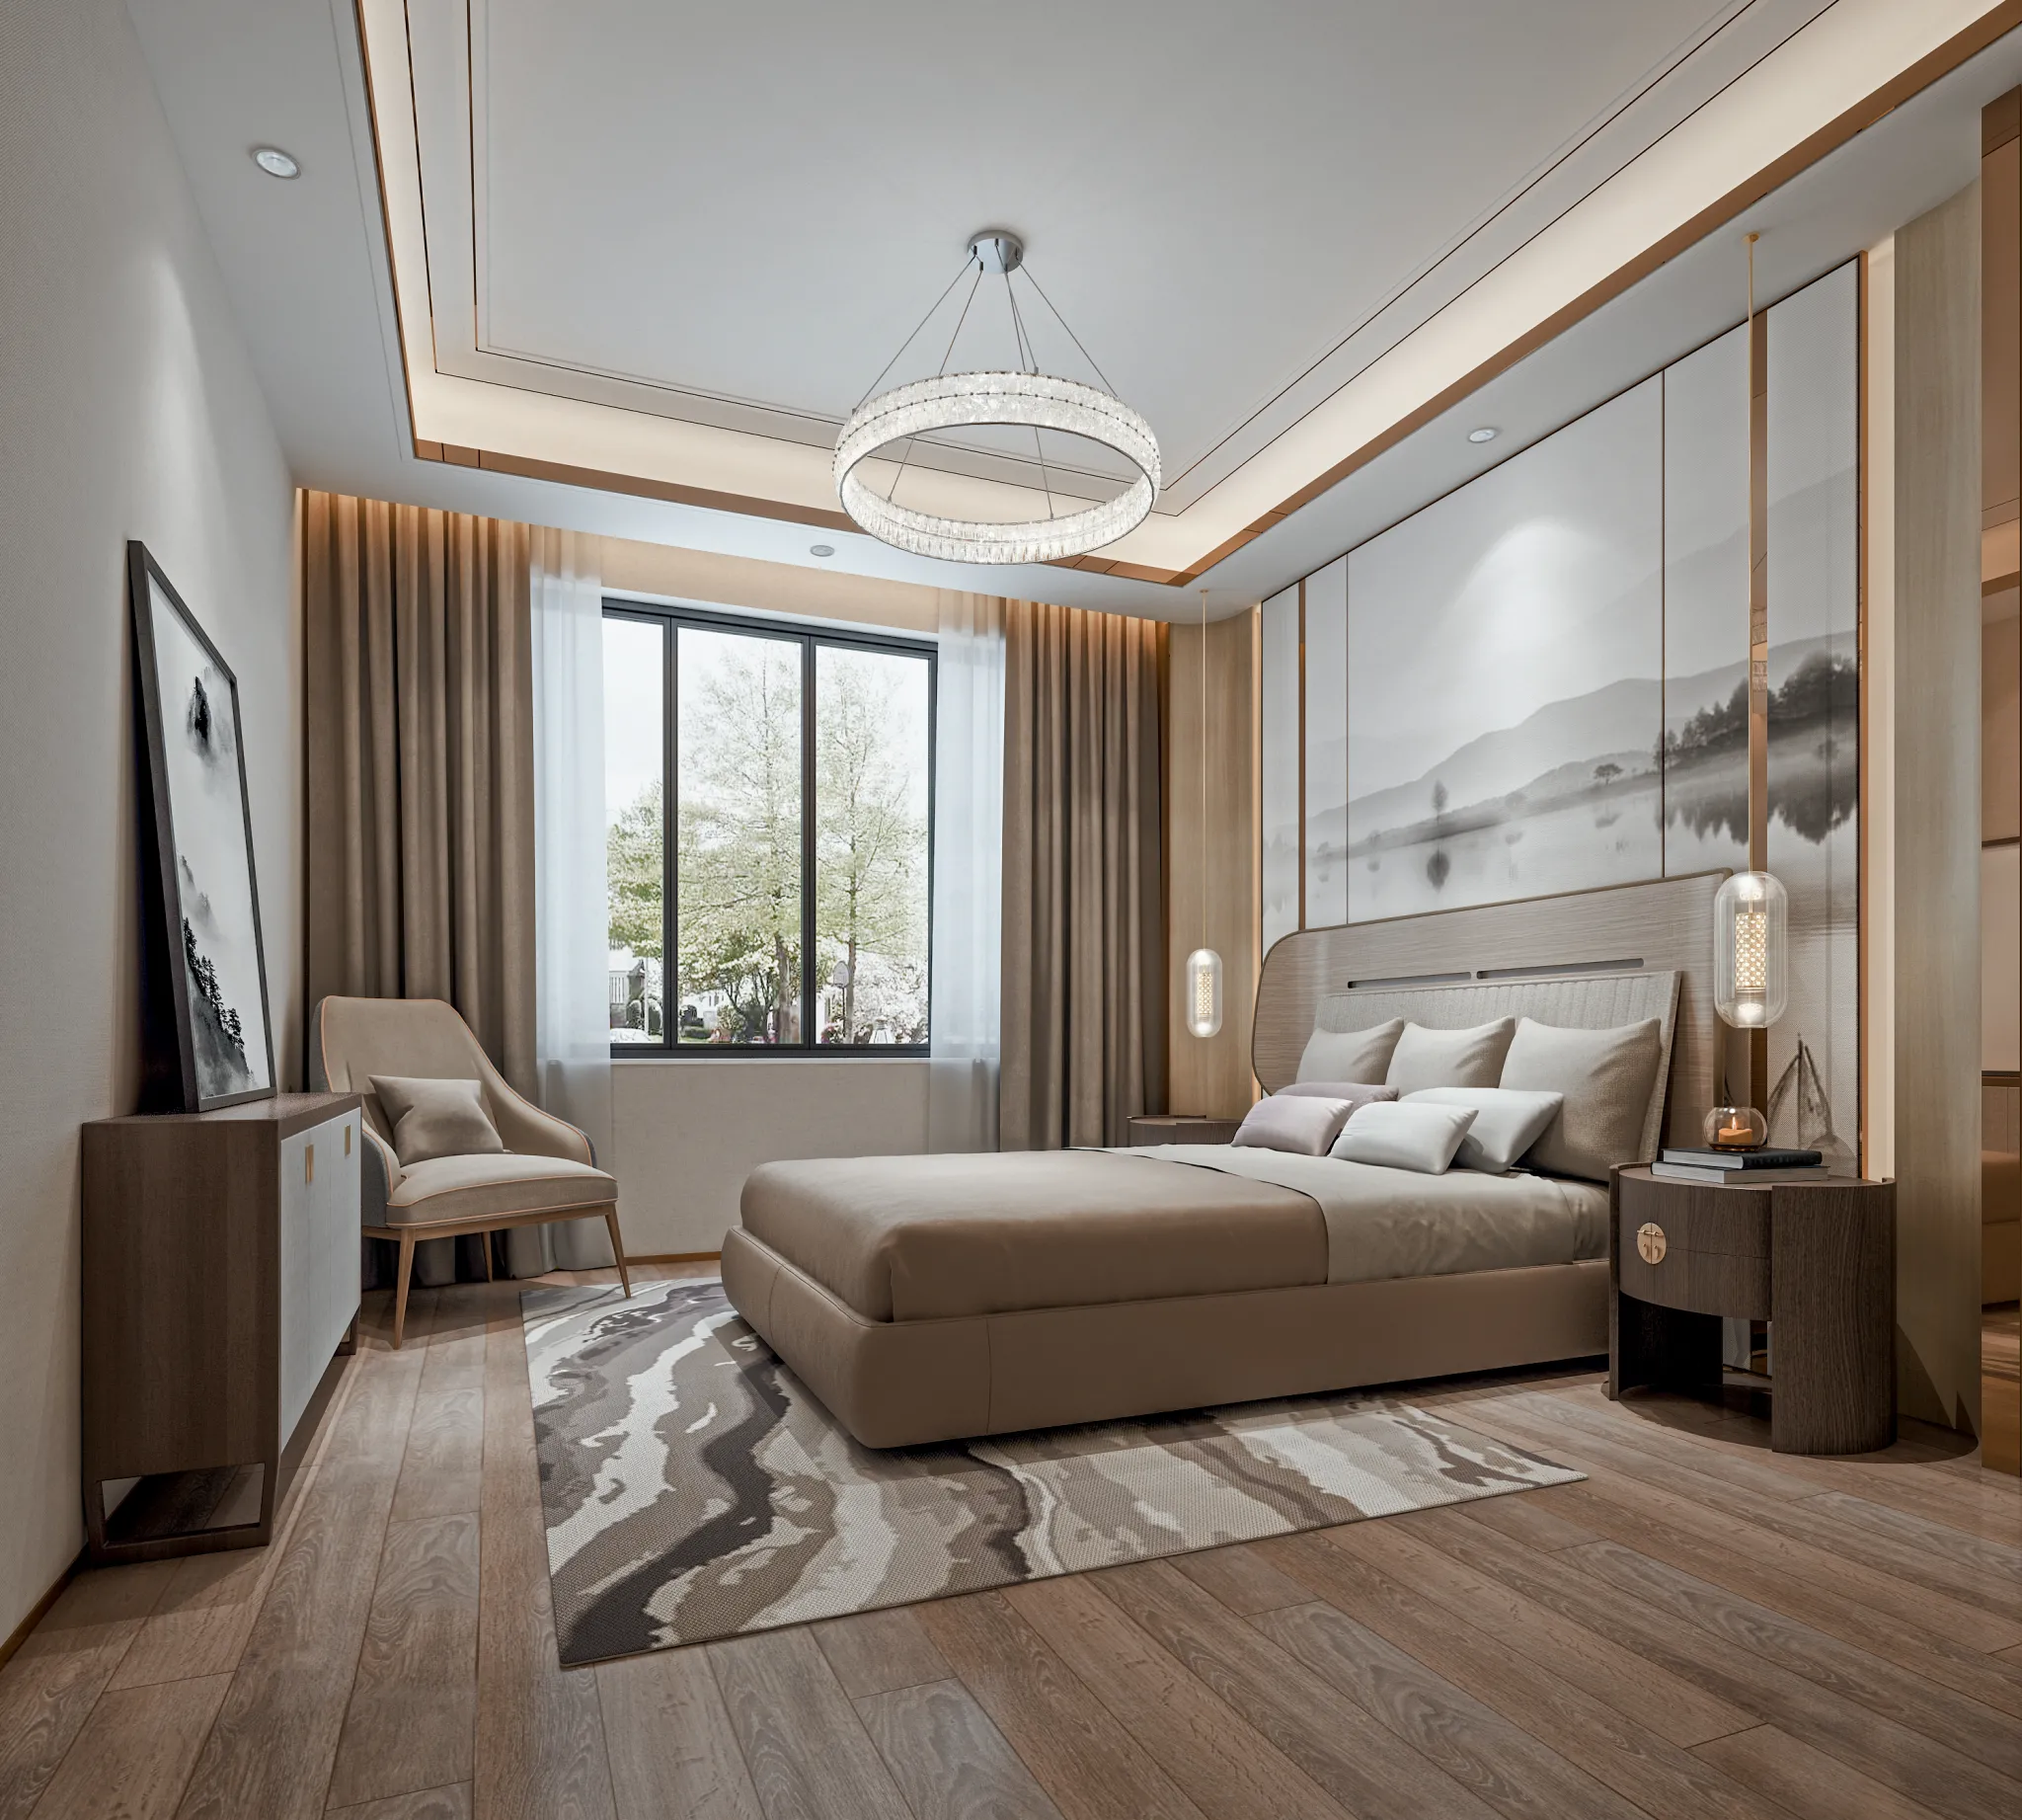 DESMOD INTERIOR 2021 (VRAY)/5. BEDROOM – 2. CHINESE STYLES – 051